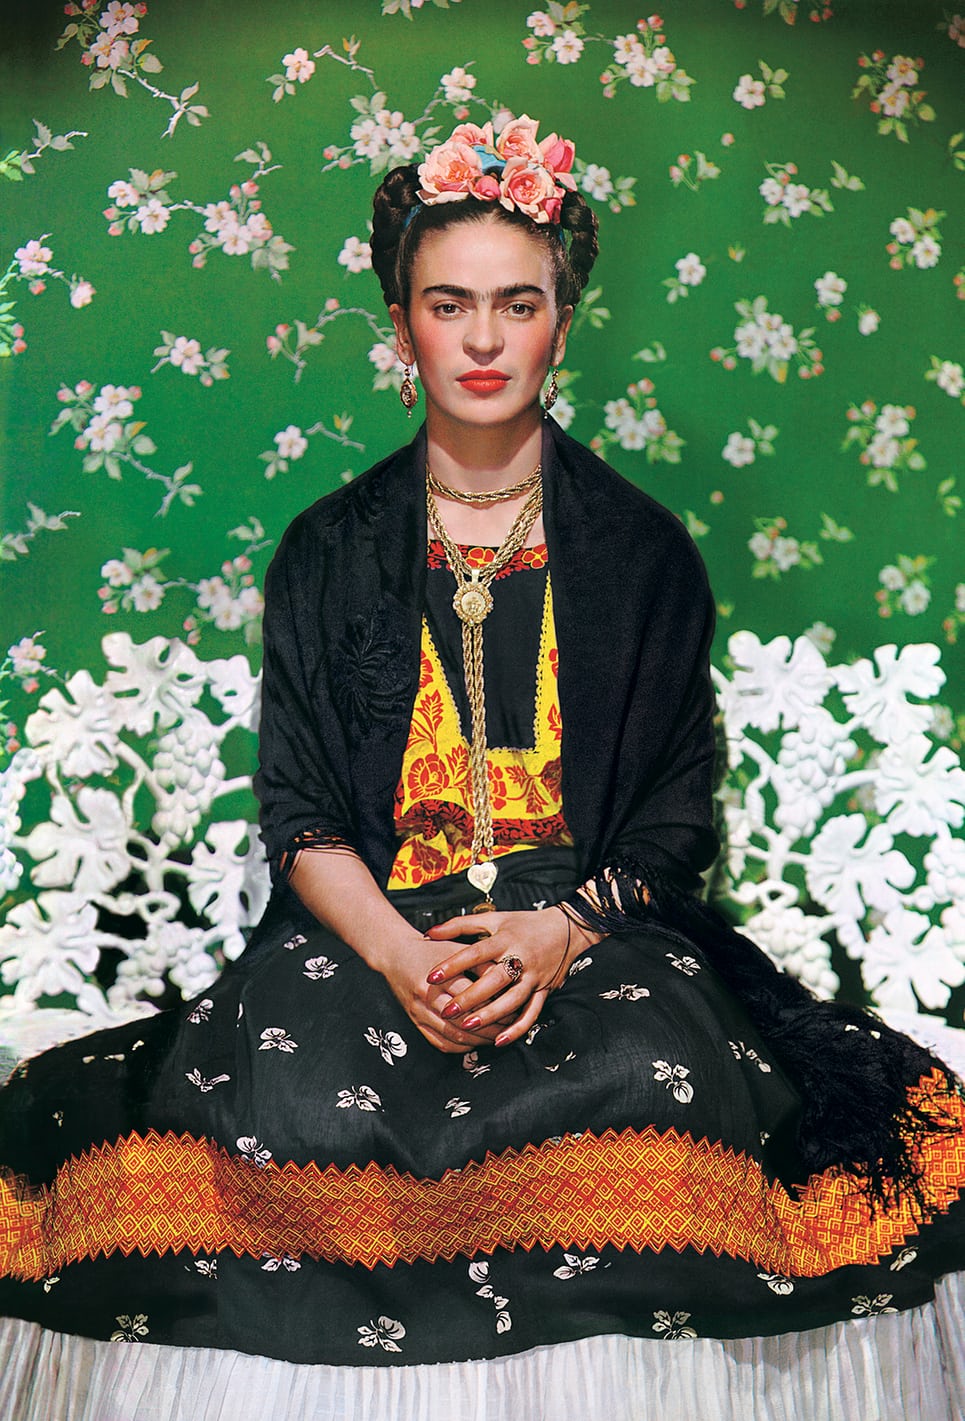 Frida Kahlo On White Bench, a photograph by Nickolas Muray, taken in 1938